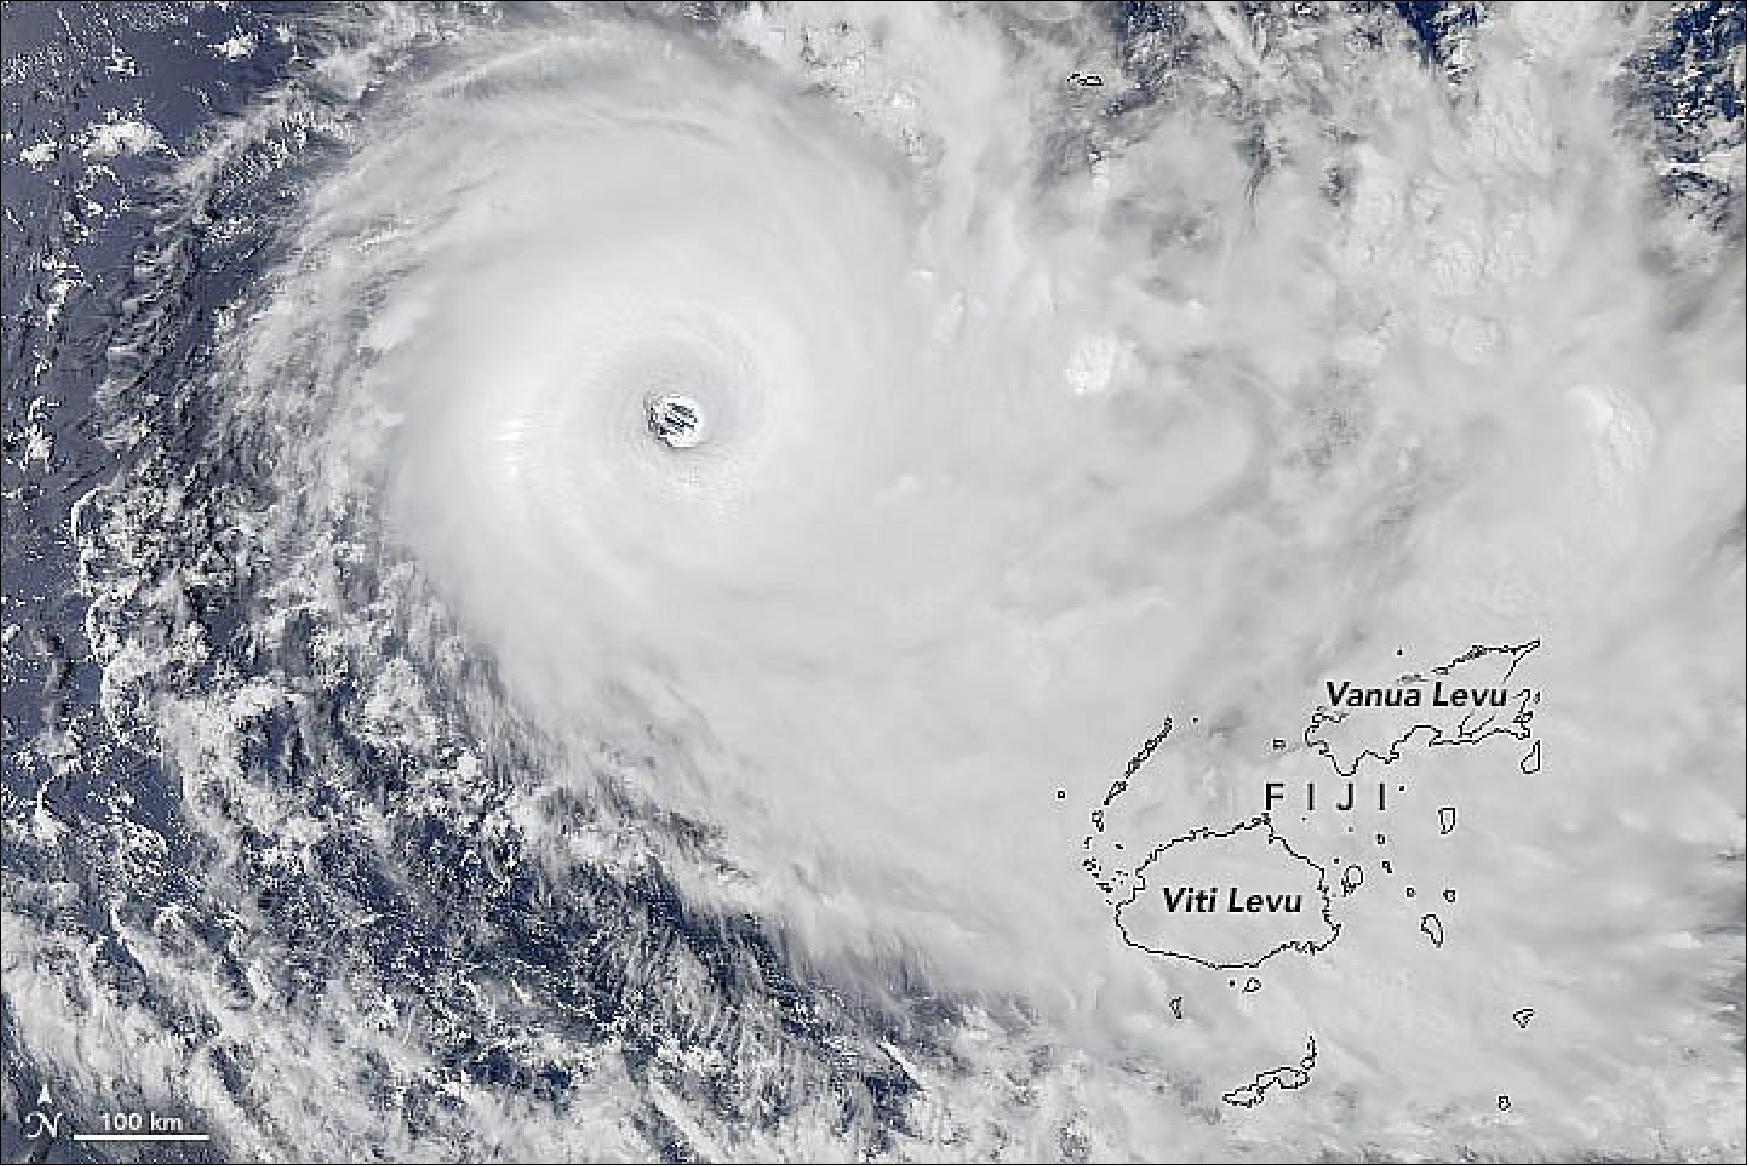 Figure 52: As of midnight Fiji standard time on December 17, the Joint Typhoon Warning Center reported sustained winds of 140 knots (260 kilometers/160 miles per hour). The center of the category 5 storm was about 400 km (240 miles) northwest of Suva, Fiji. The storm’s eye appeared to be headed between the islands of Viti Levu and Vanua Levu. Forecasters noted that wave heights around the eye of the storm could approach 14 meters (45 feet). The natural-color image above was acquired in the early afternoon on December 16, 2020, by the MODIS instrument on NASA’s Aqua satellite (image credit: NASA Earth Observatory images by Joshua Stevens, using MODIS data from NASA EOSDIS/LANCE and GIBS/Worldview and sea surface temperature data from the Multiscale Ultrahigh Resolution (MUR) project. Story by Michael Carlowicz)